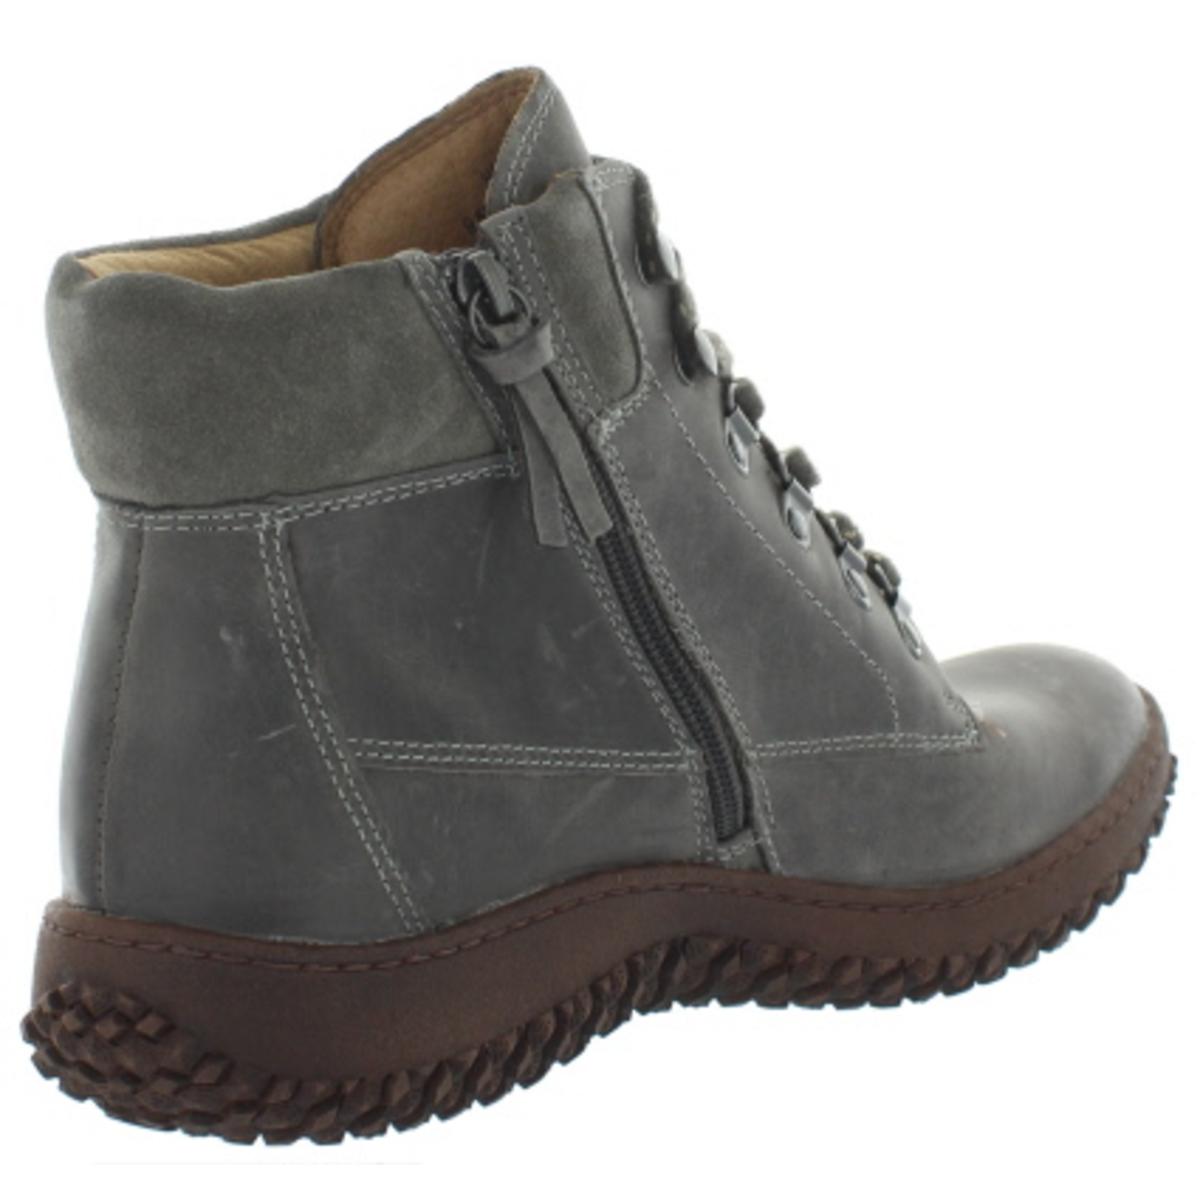 Sofft Womens Gray Leather Ankle Hiking Boots Shoes 9.5 Medium (B,M ...